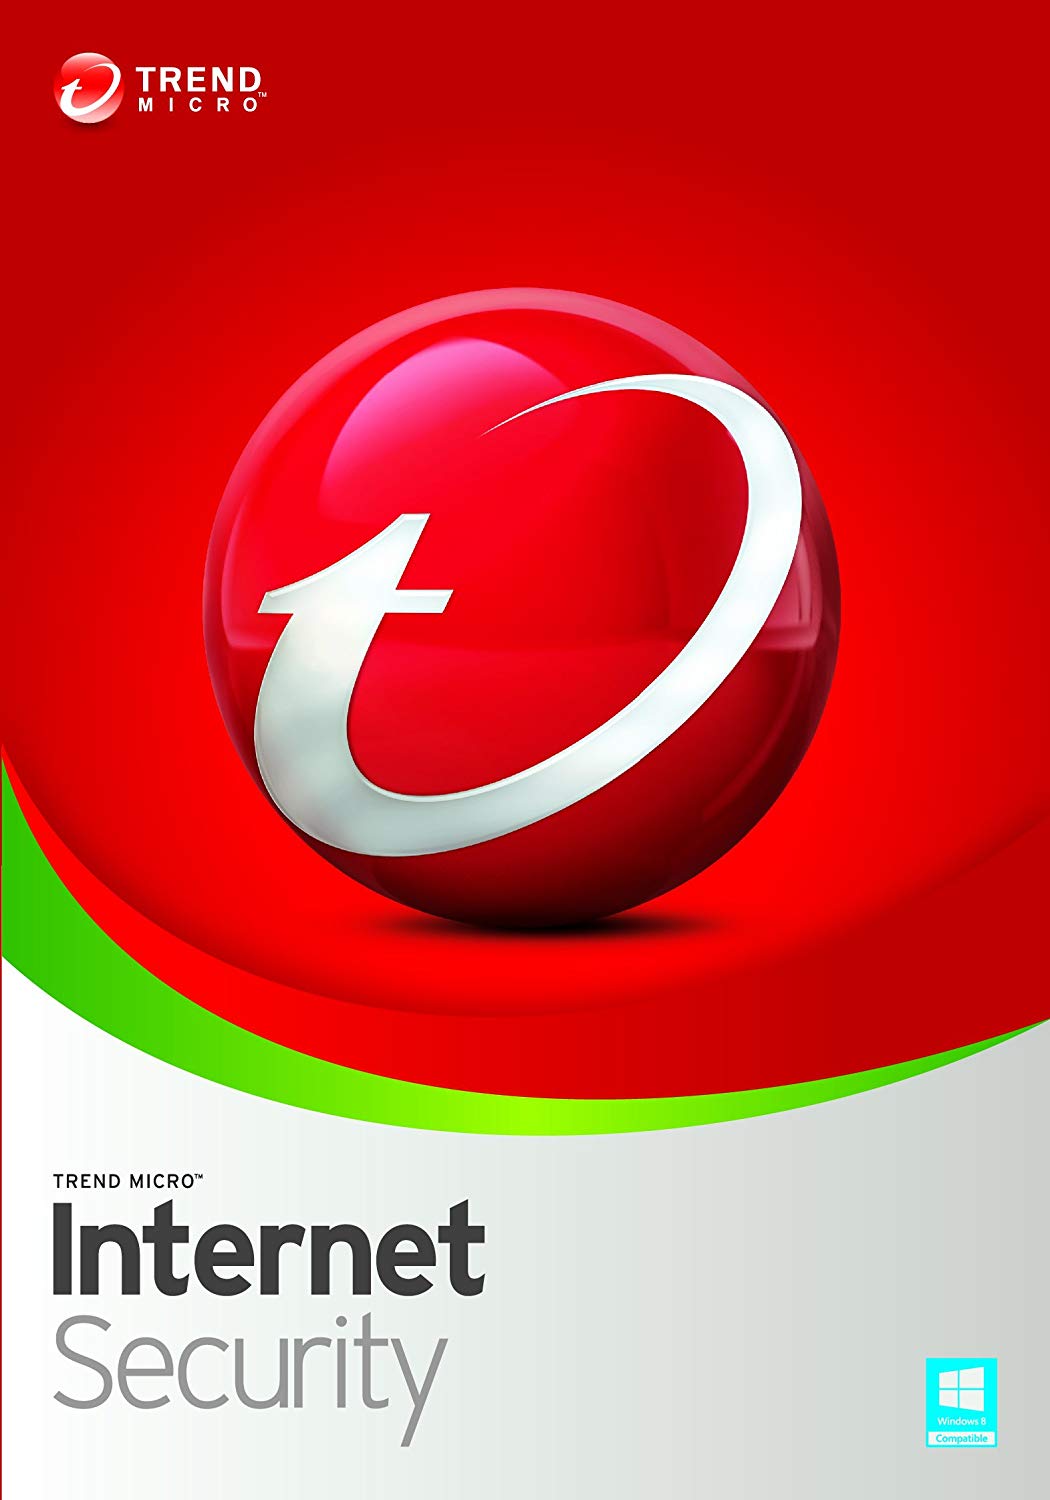 Trend Micro Internet Security CD Key (Digital Download): 3 Devices